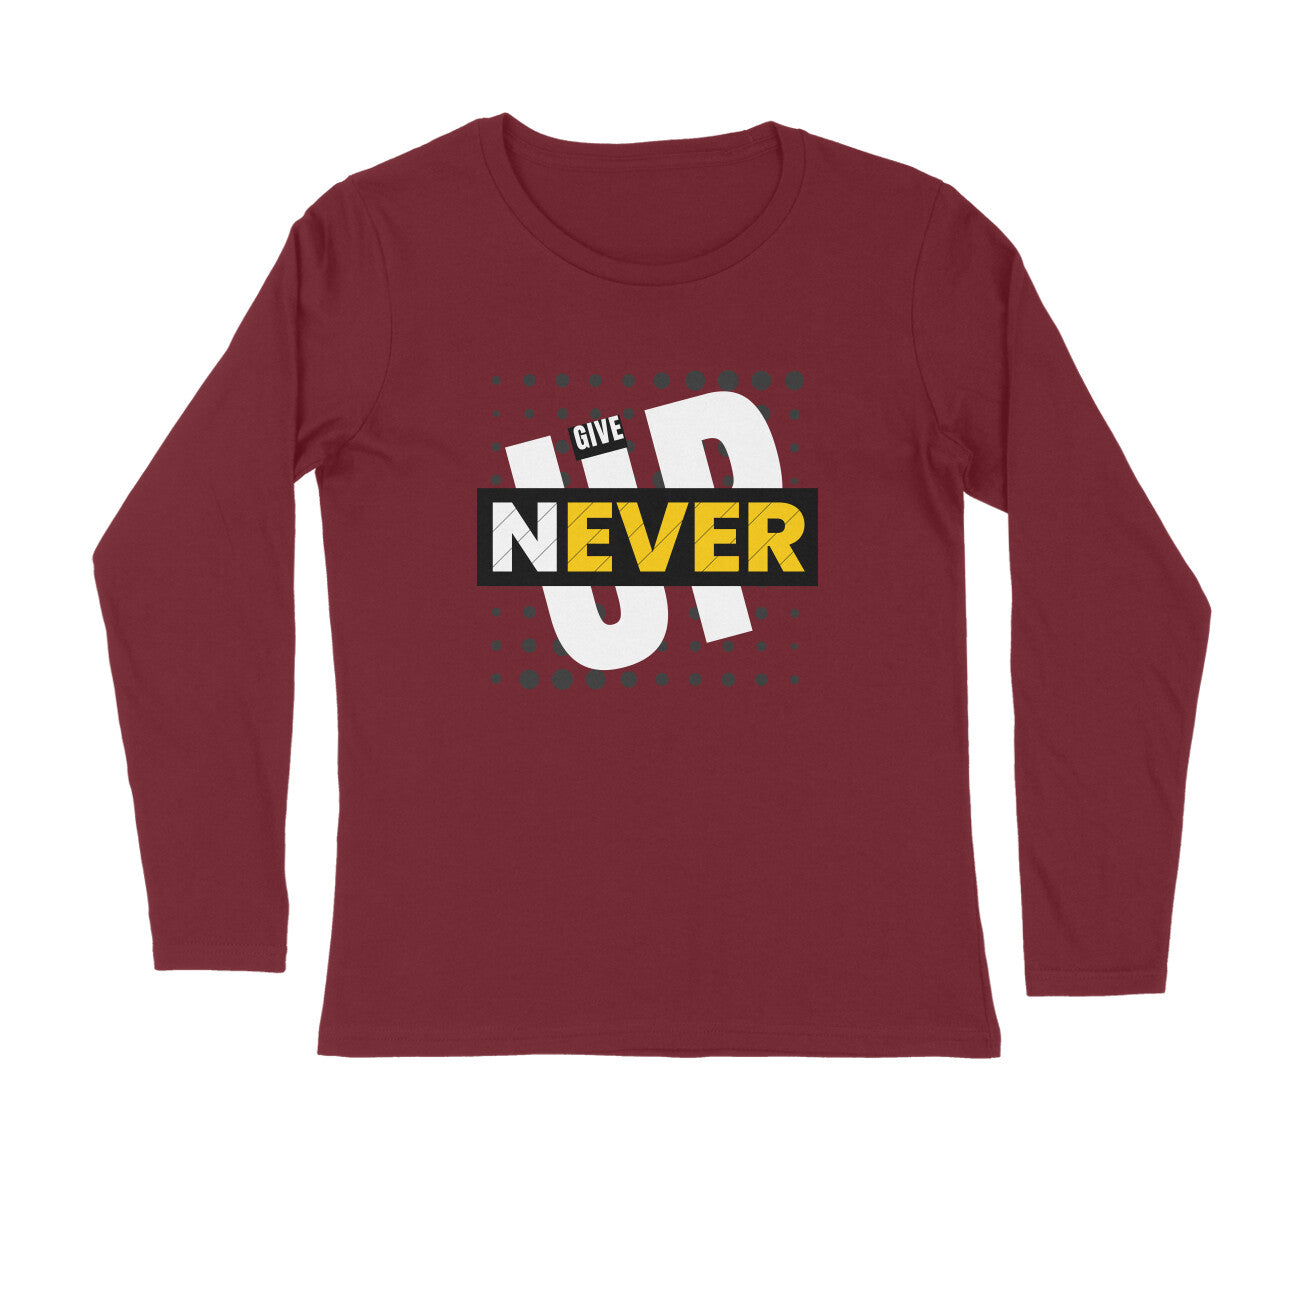 Never Give Up - Men's Maroon Full Sleeve T-shirt